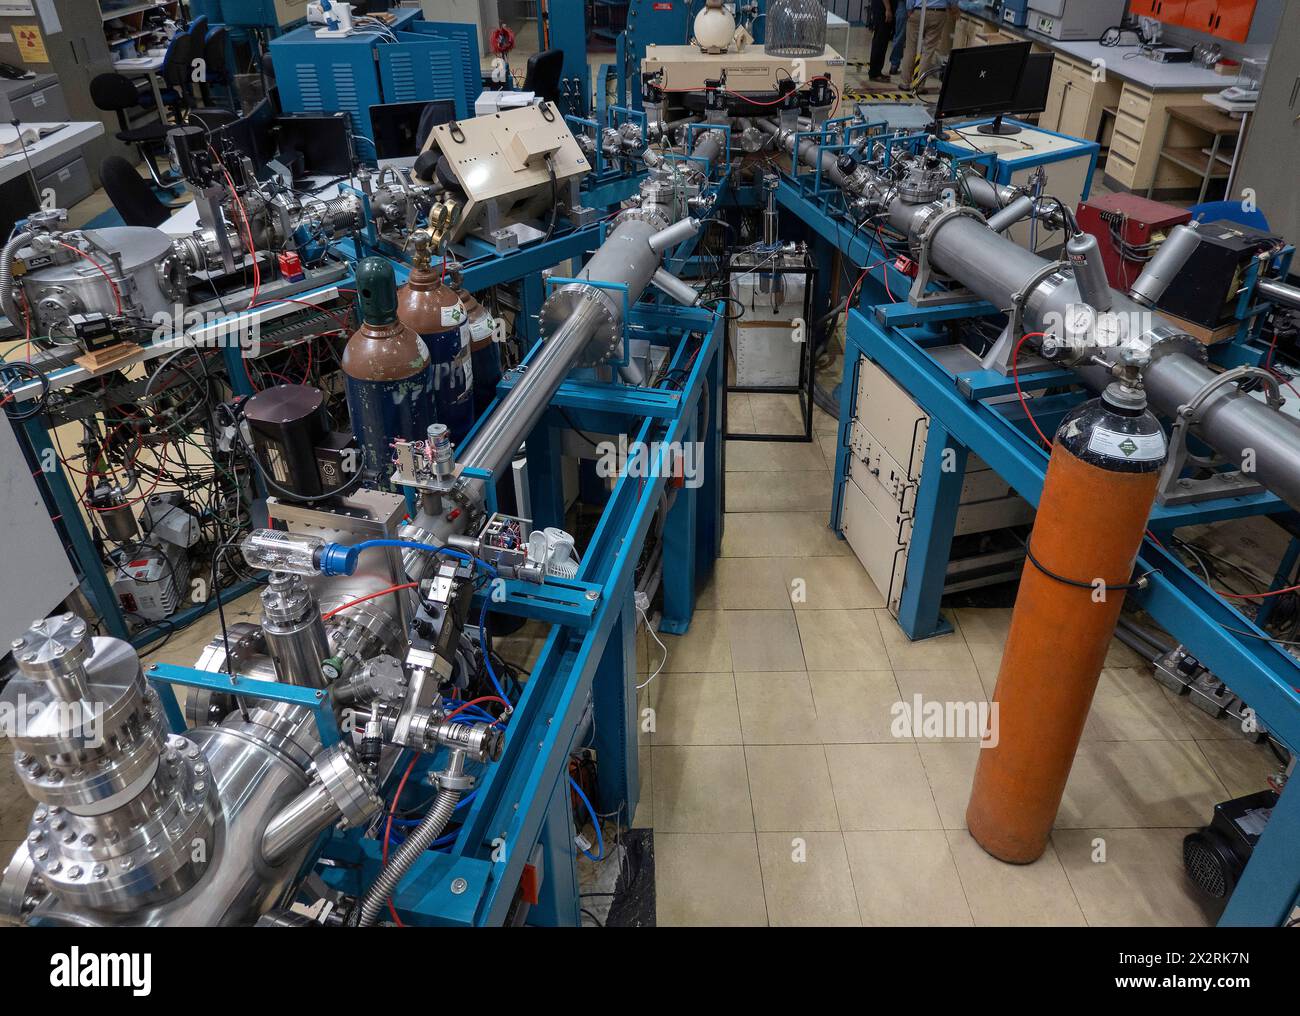 Particle accelerator equipment in university physics laboratory Stock Photo